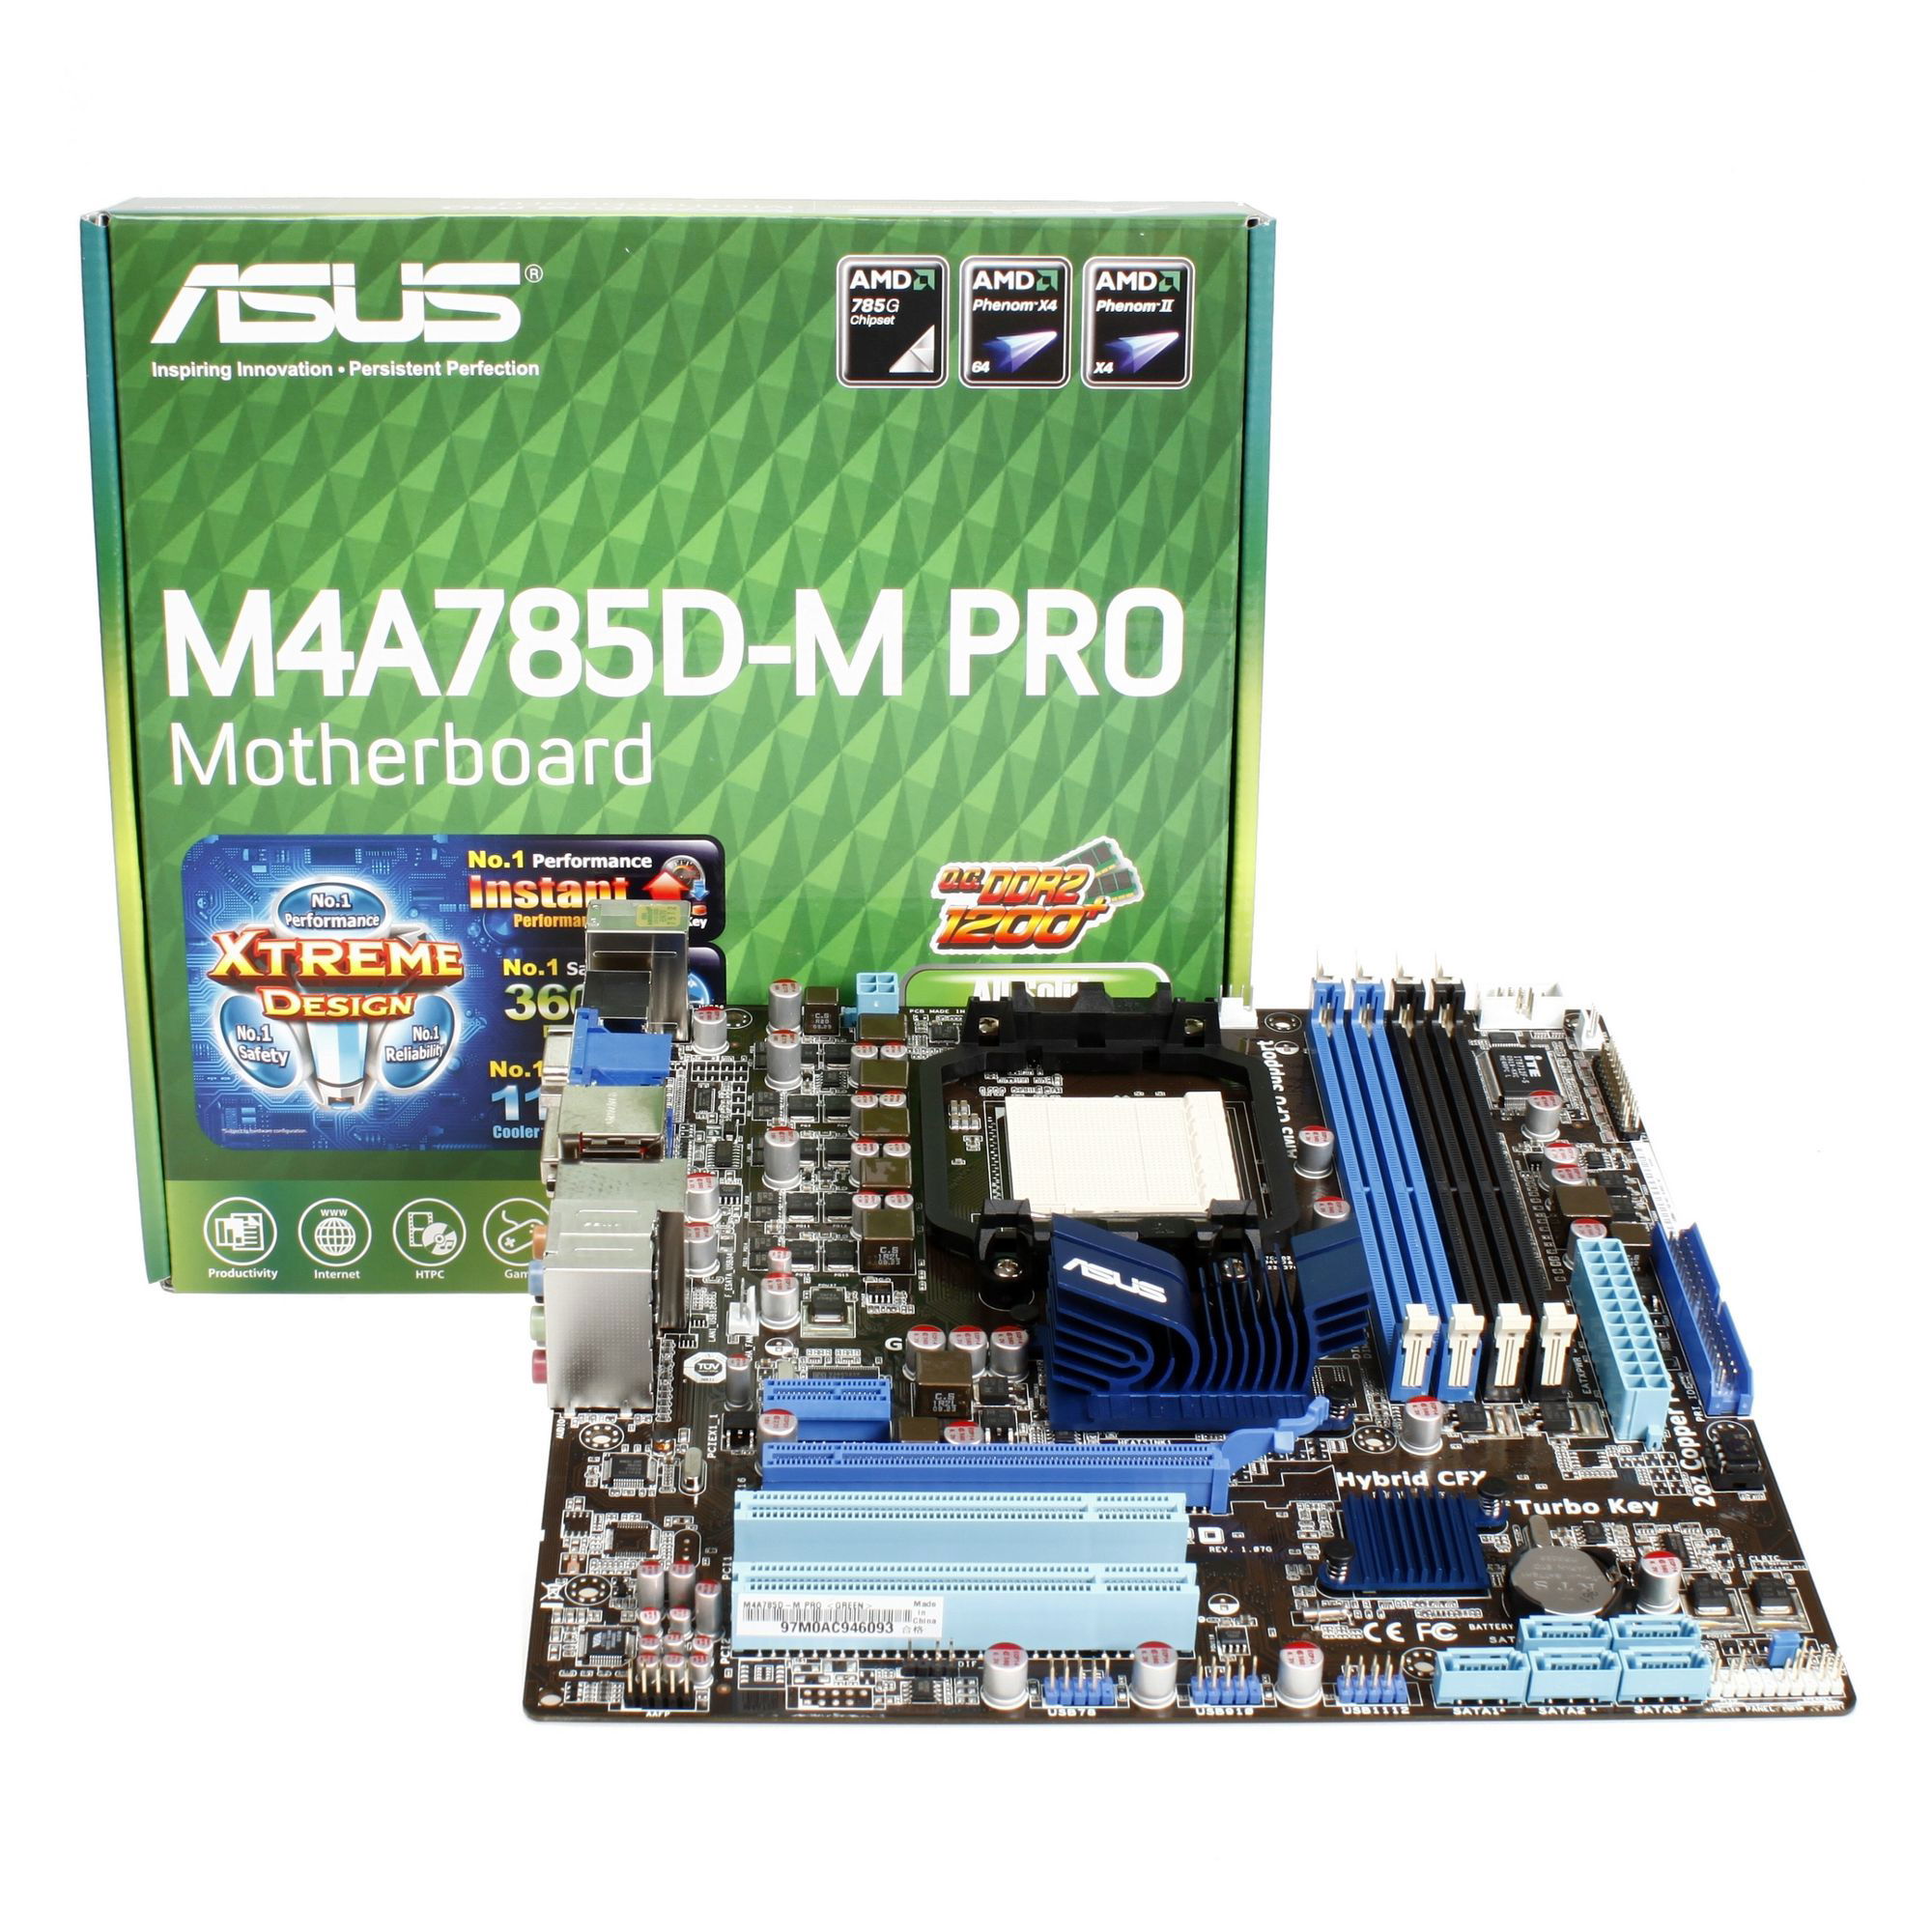 ASUS M4A785D-M PRO - Motherboard | alza.sk